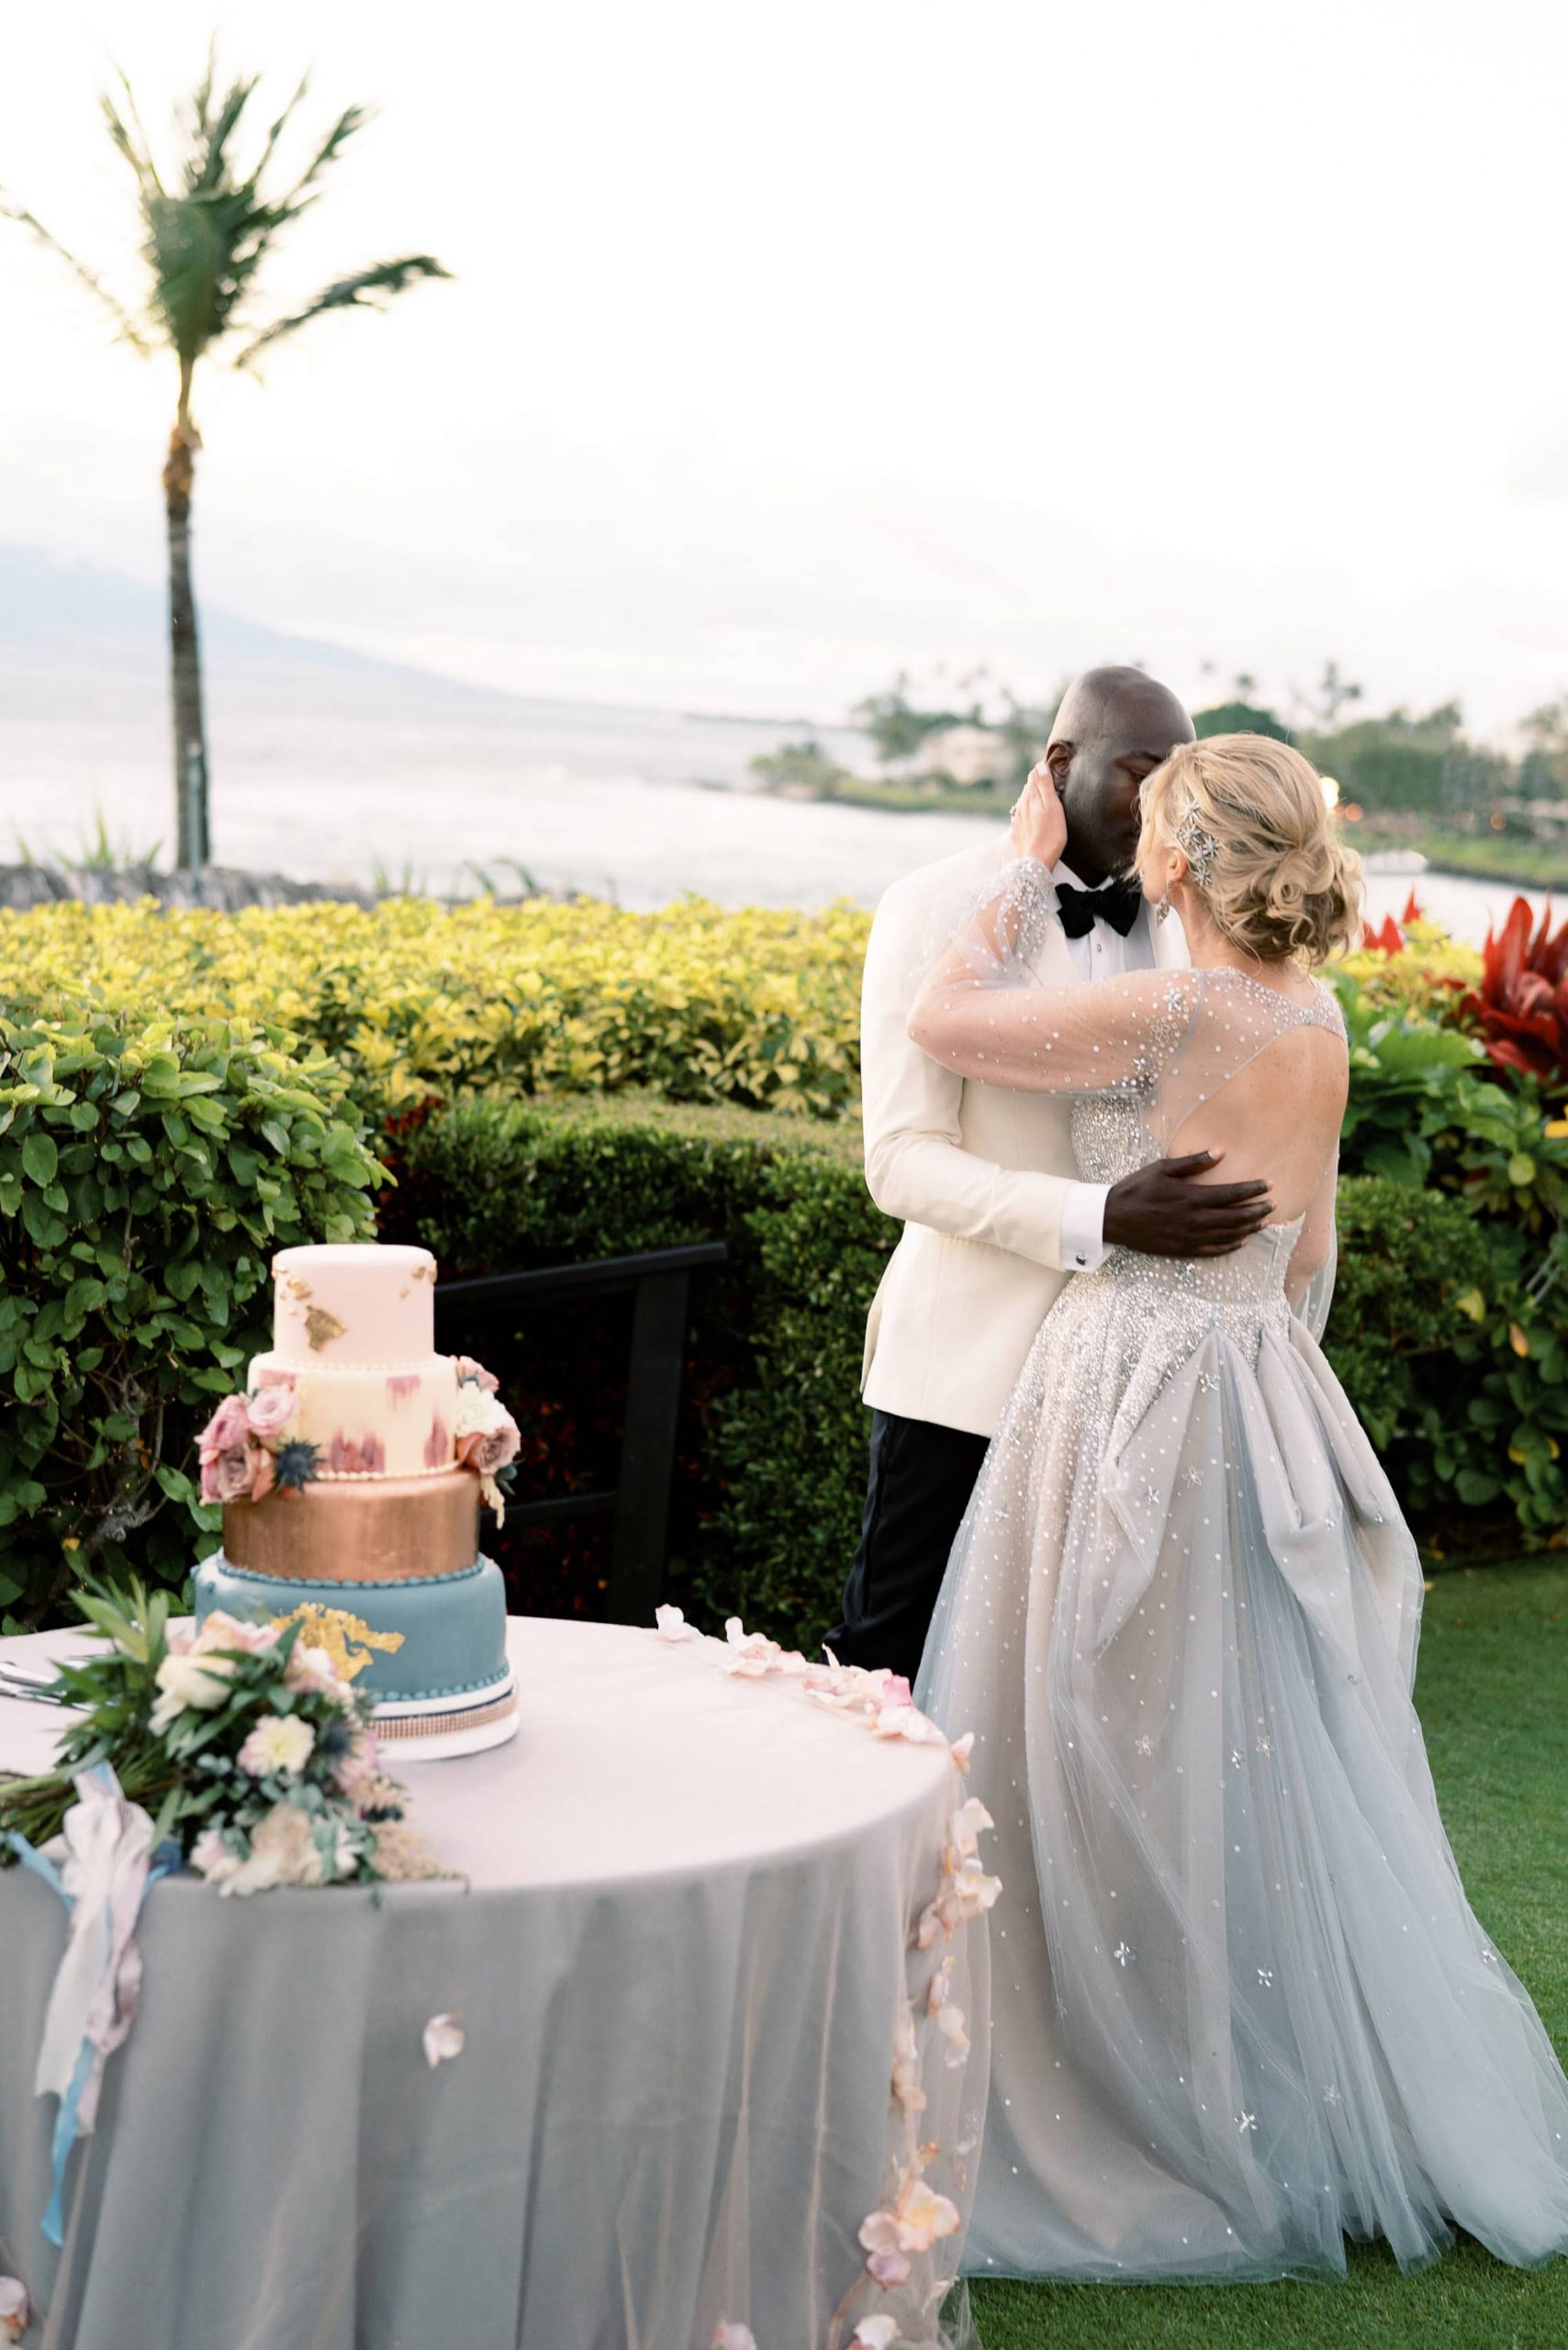 Bride and groom kiss in front of wedding cake at Maui wedding at Four Seasons Resort Maui in Wailea, Hawaii | Photo by James x Schulze